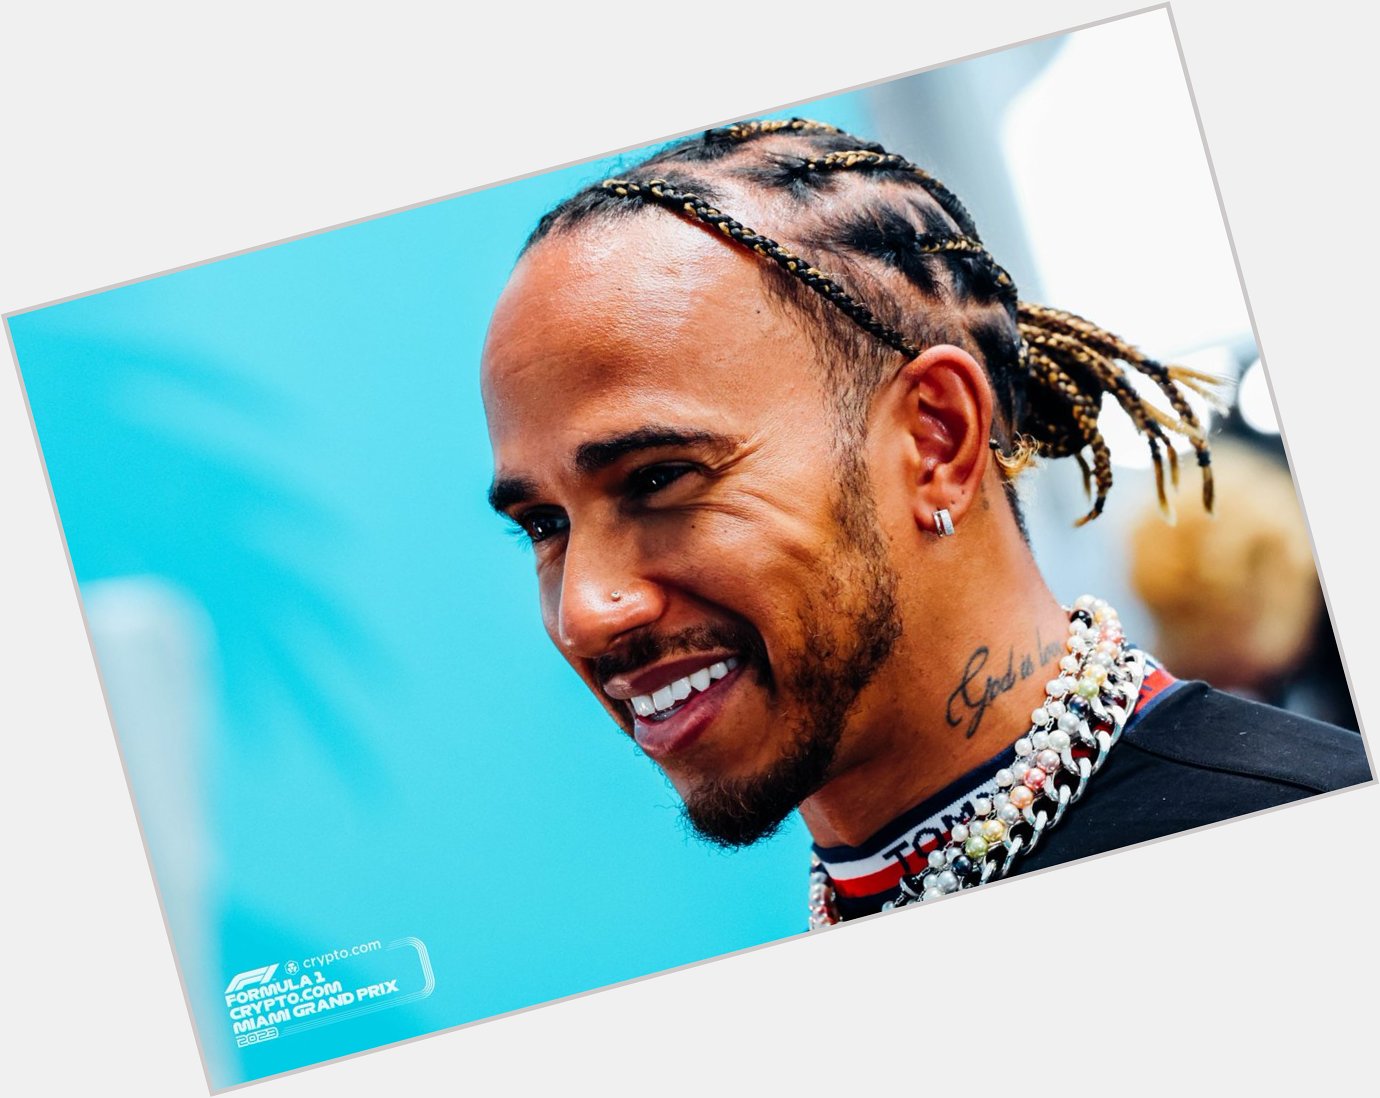 There s no one like Sir Lewis Hamilton Wishing a very happy birthday to  